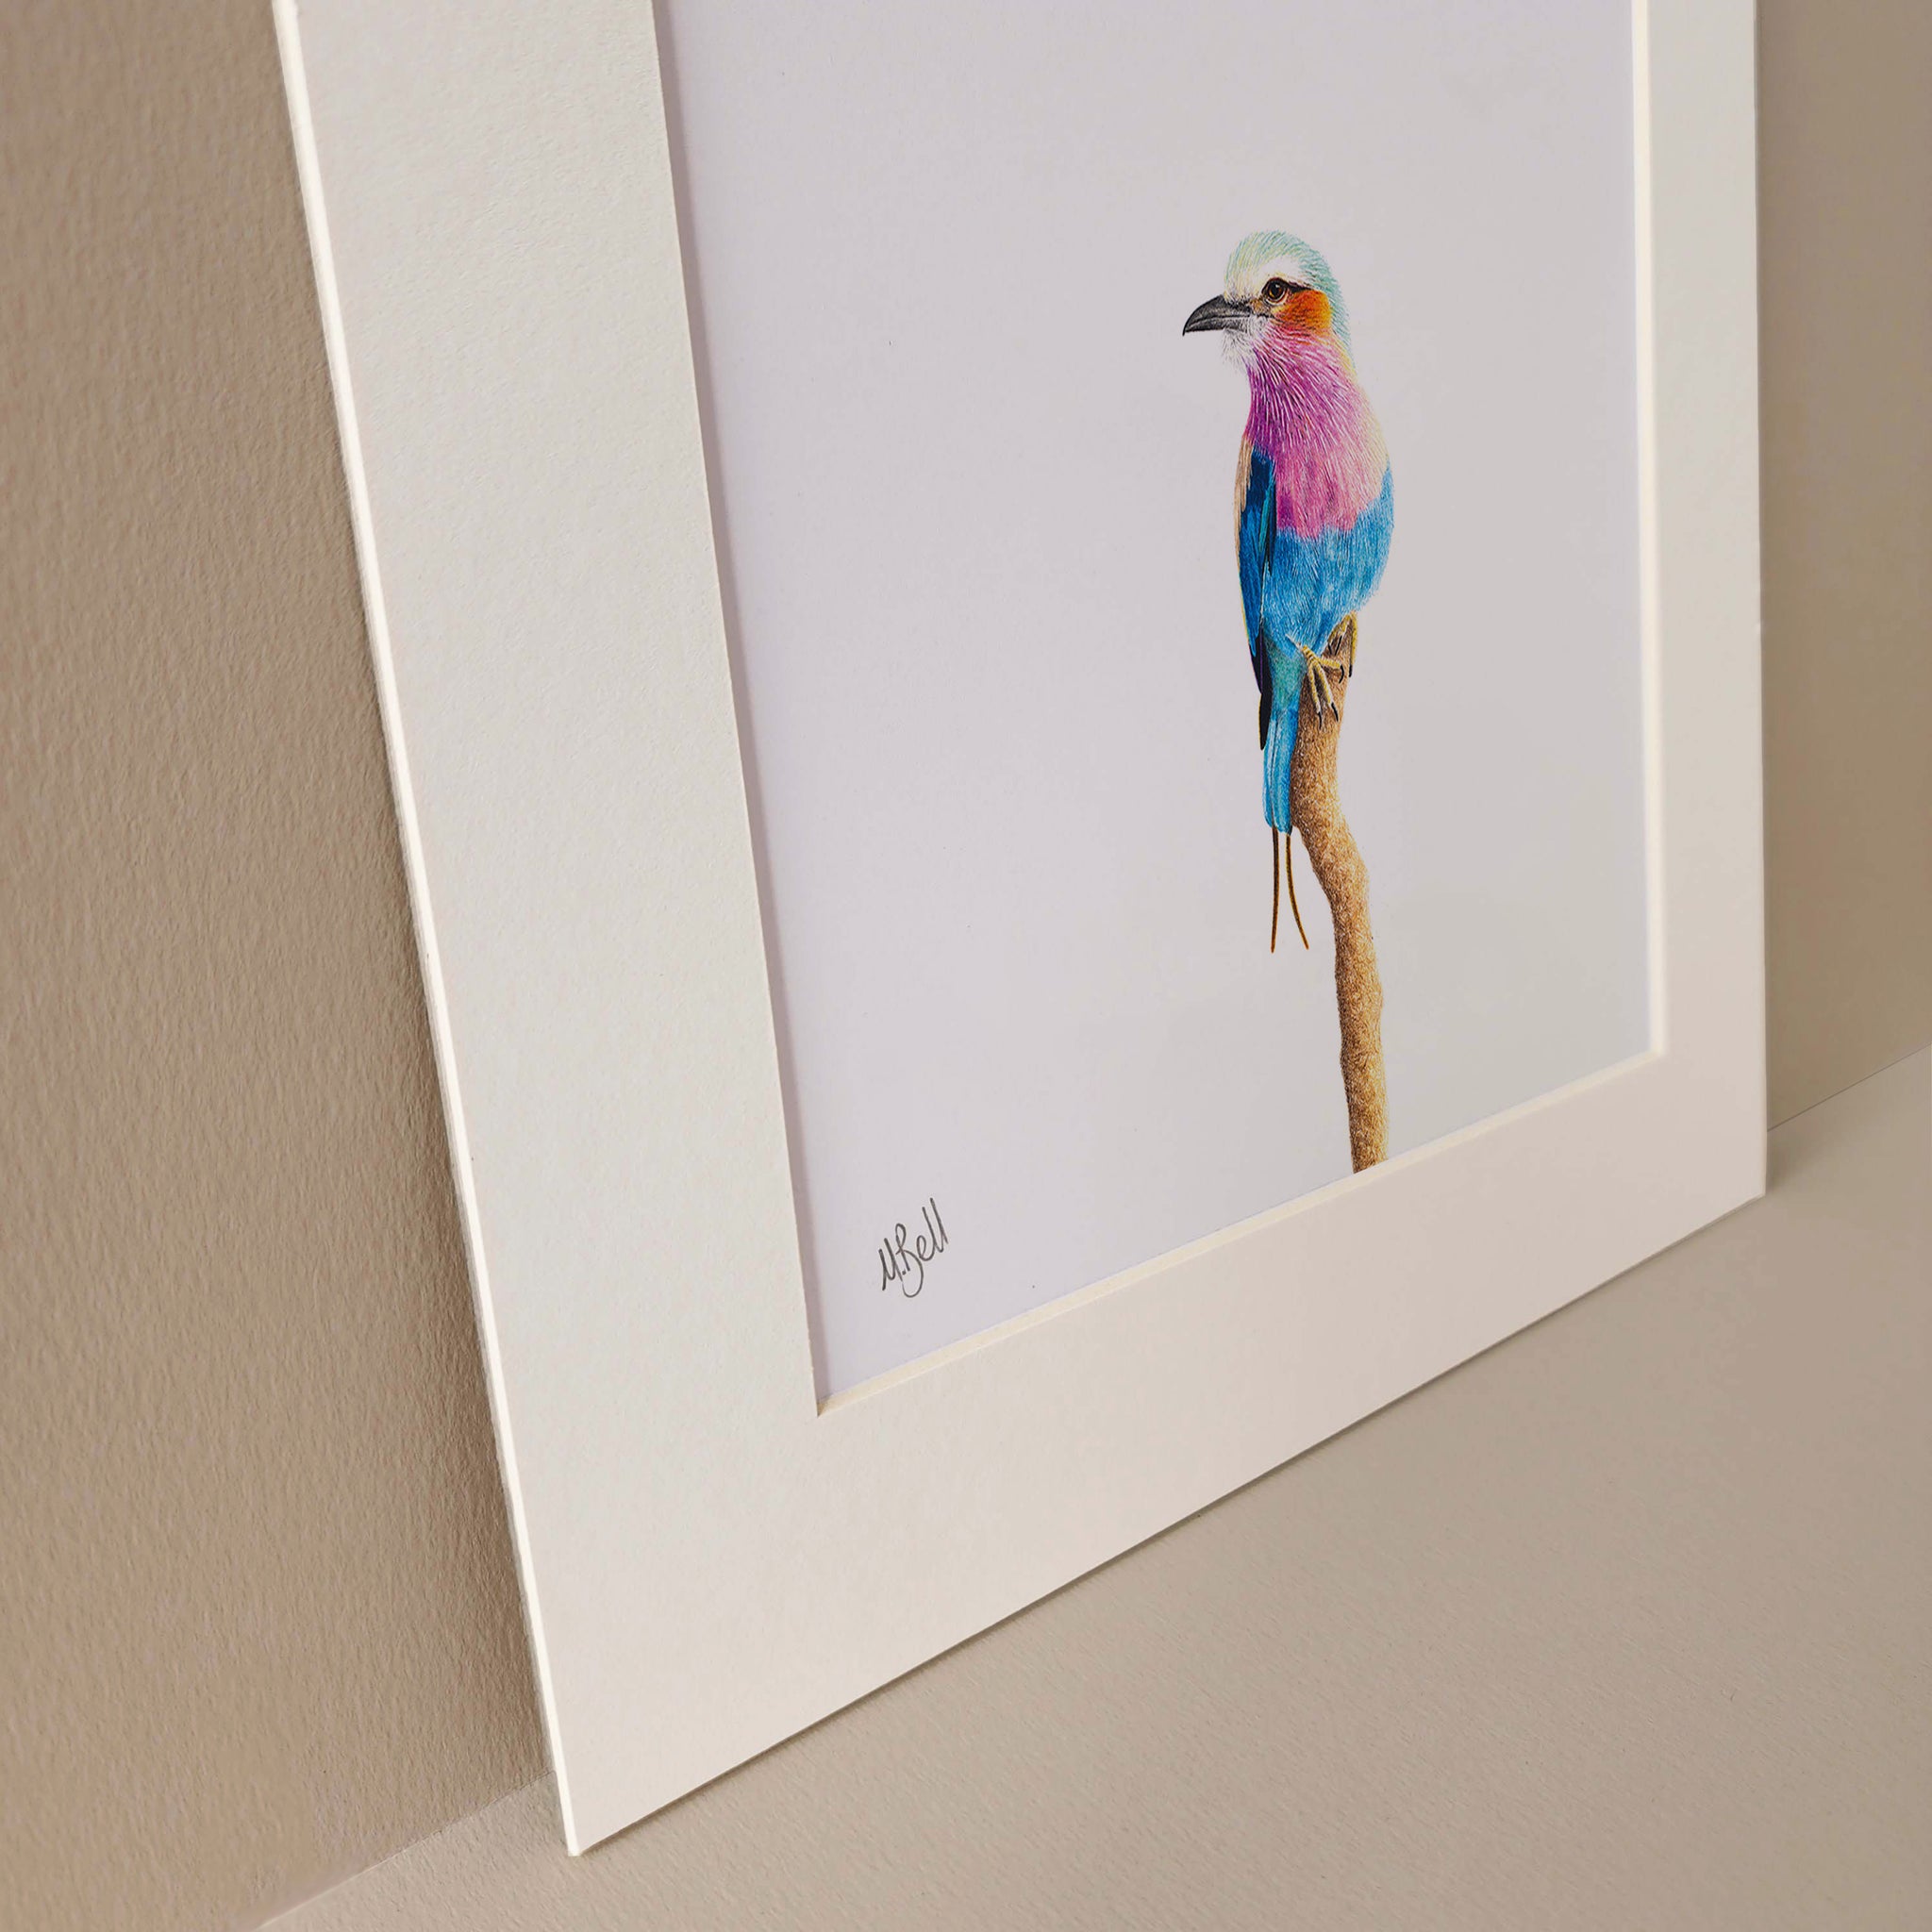 Lilac Breasted Roller pencil drawing by South African bird artist Matthew Bell